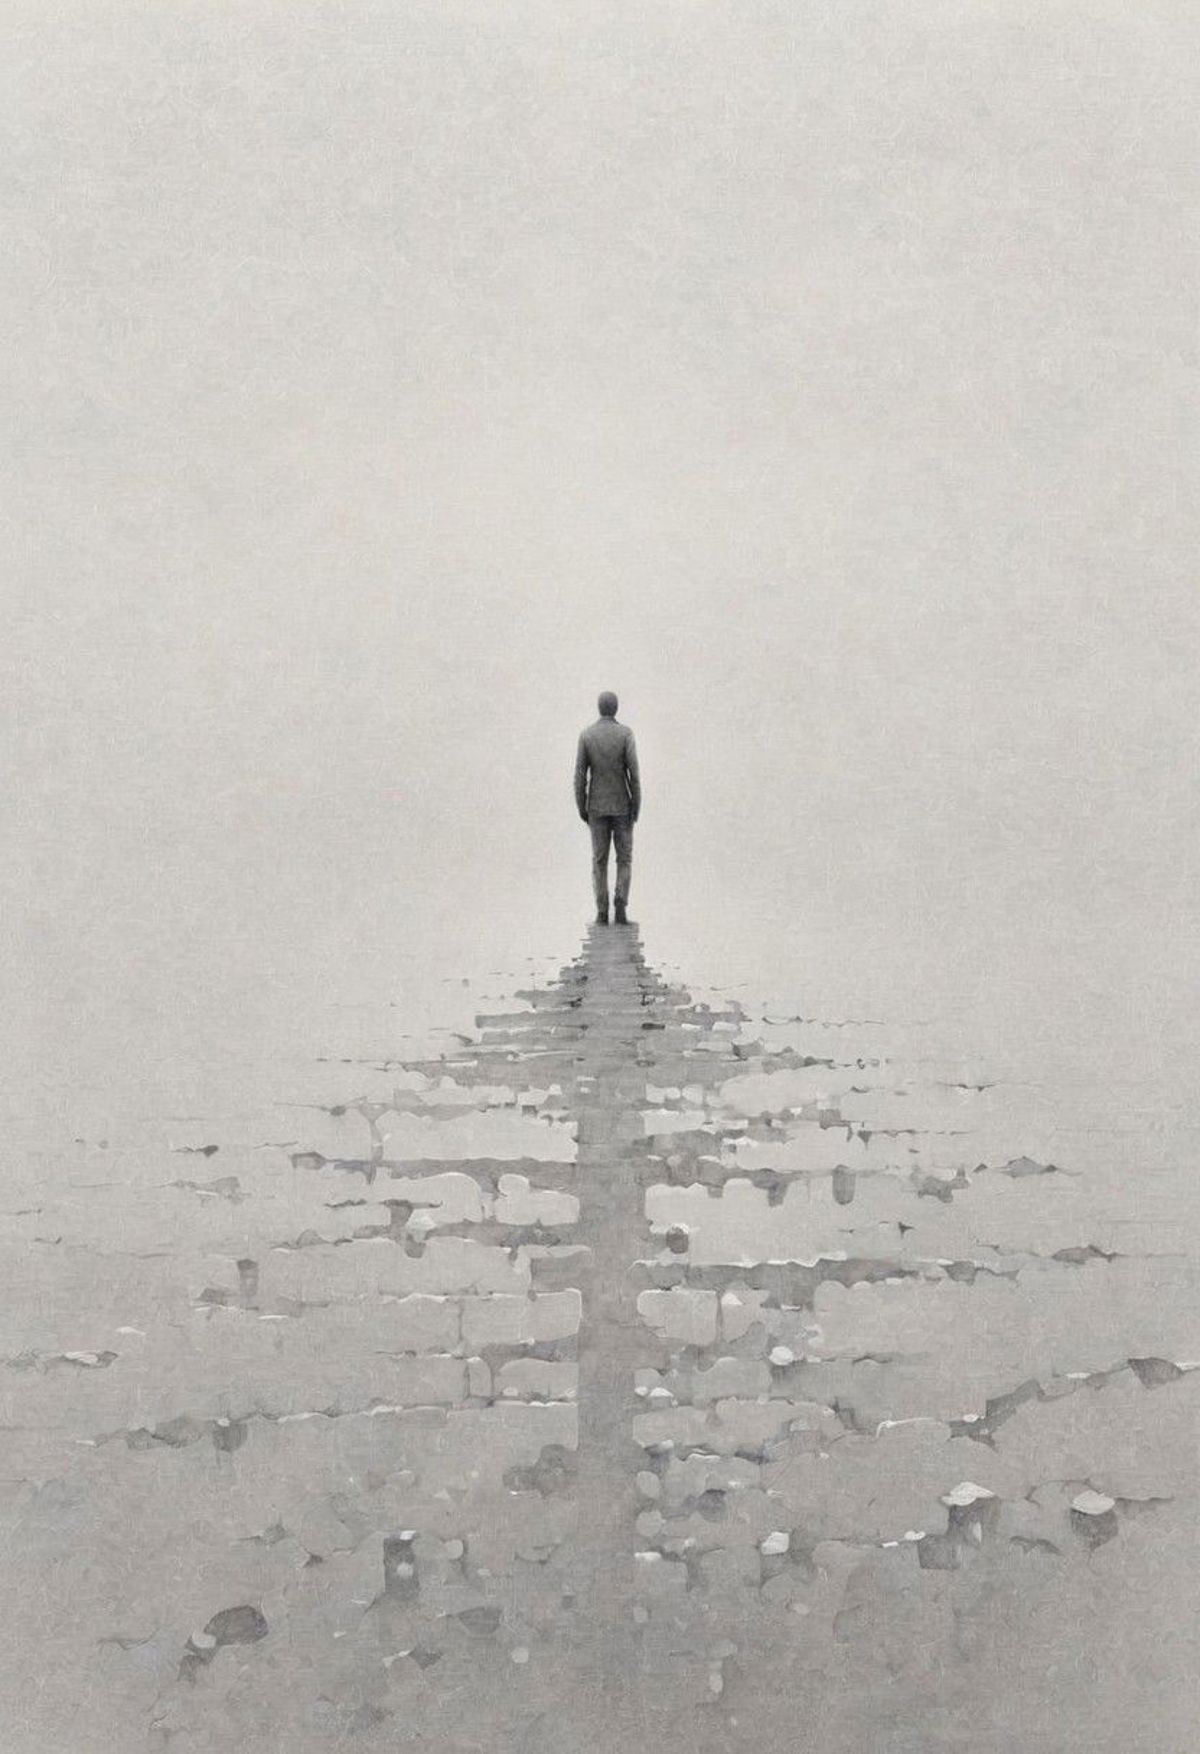 The Lonely Man Walking Along the Cracked Road